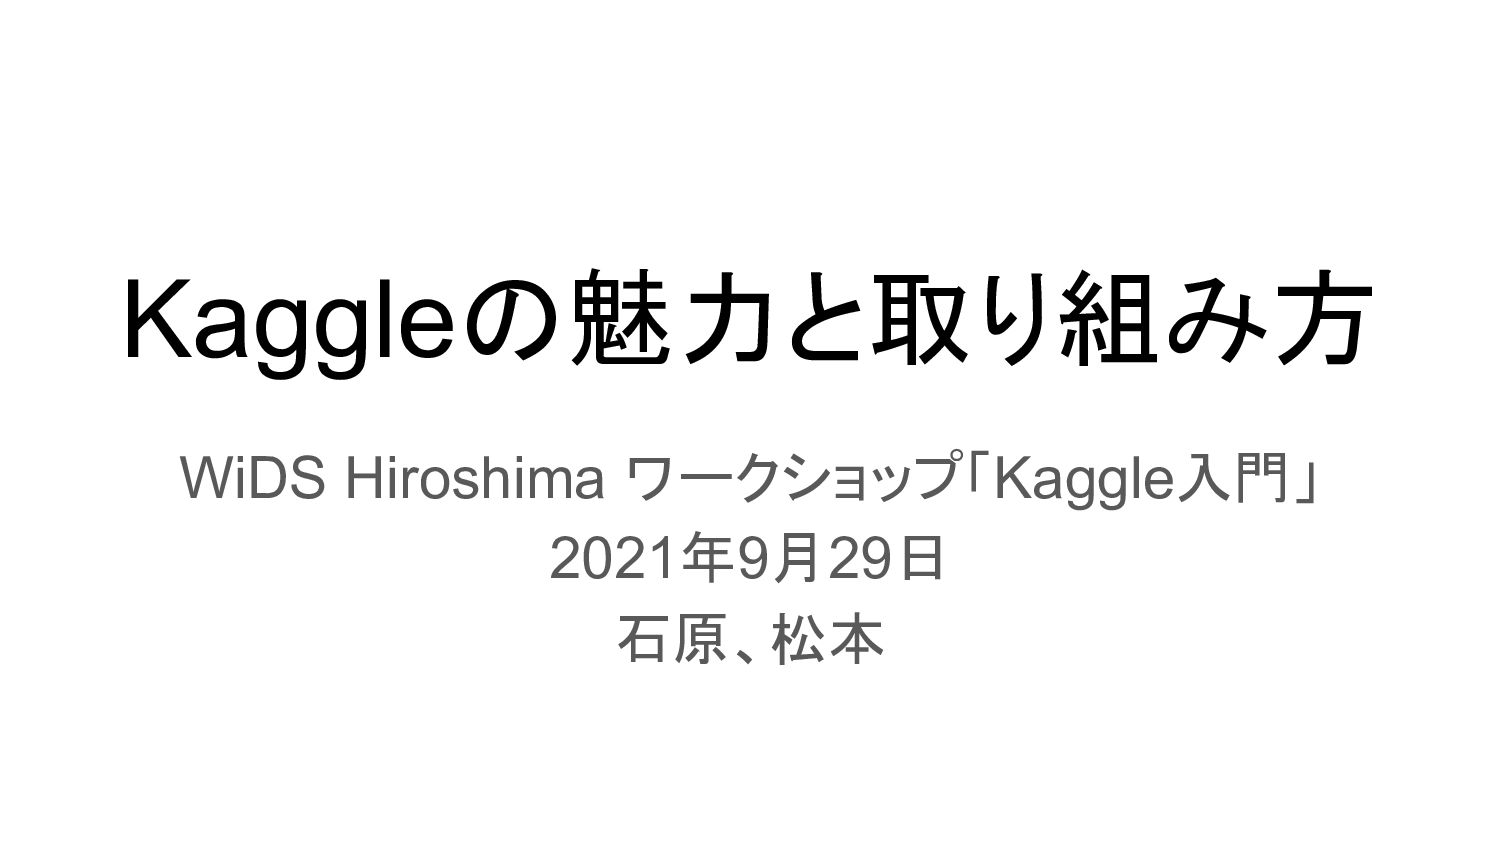 Kaggleの魅力と取り組み方 / Attractiveness and Approach of Kaggle